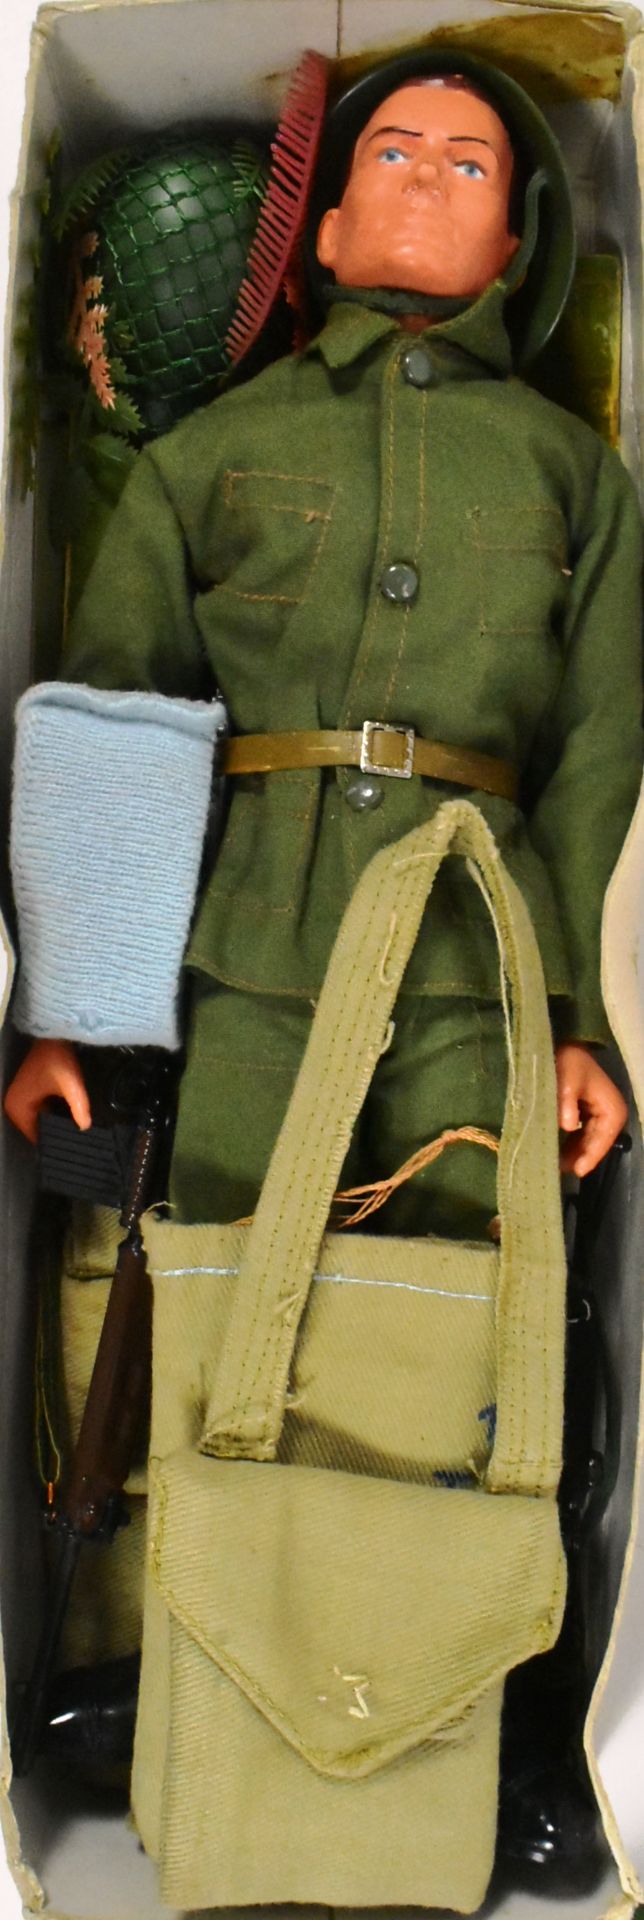 TOMMY GUNN - PEDIGREE - VINTAGE ACTION MAN STYLE FIGURE / DOLL - Image 2 of 5